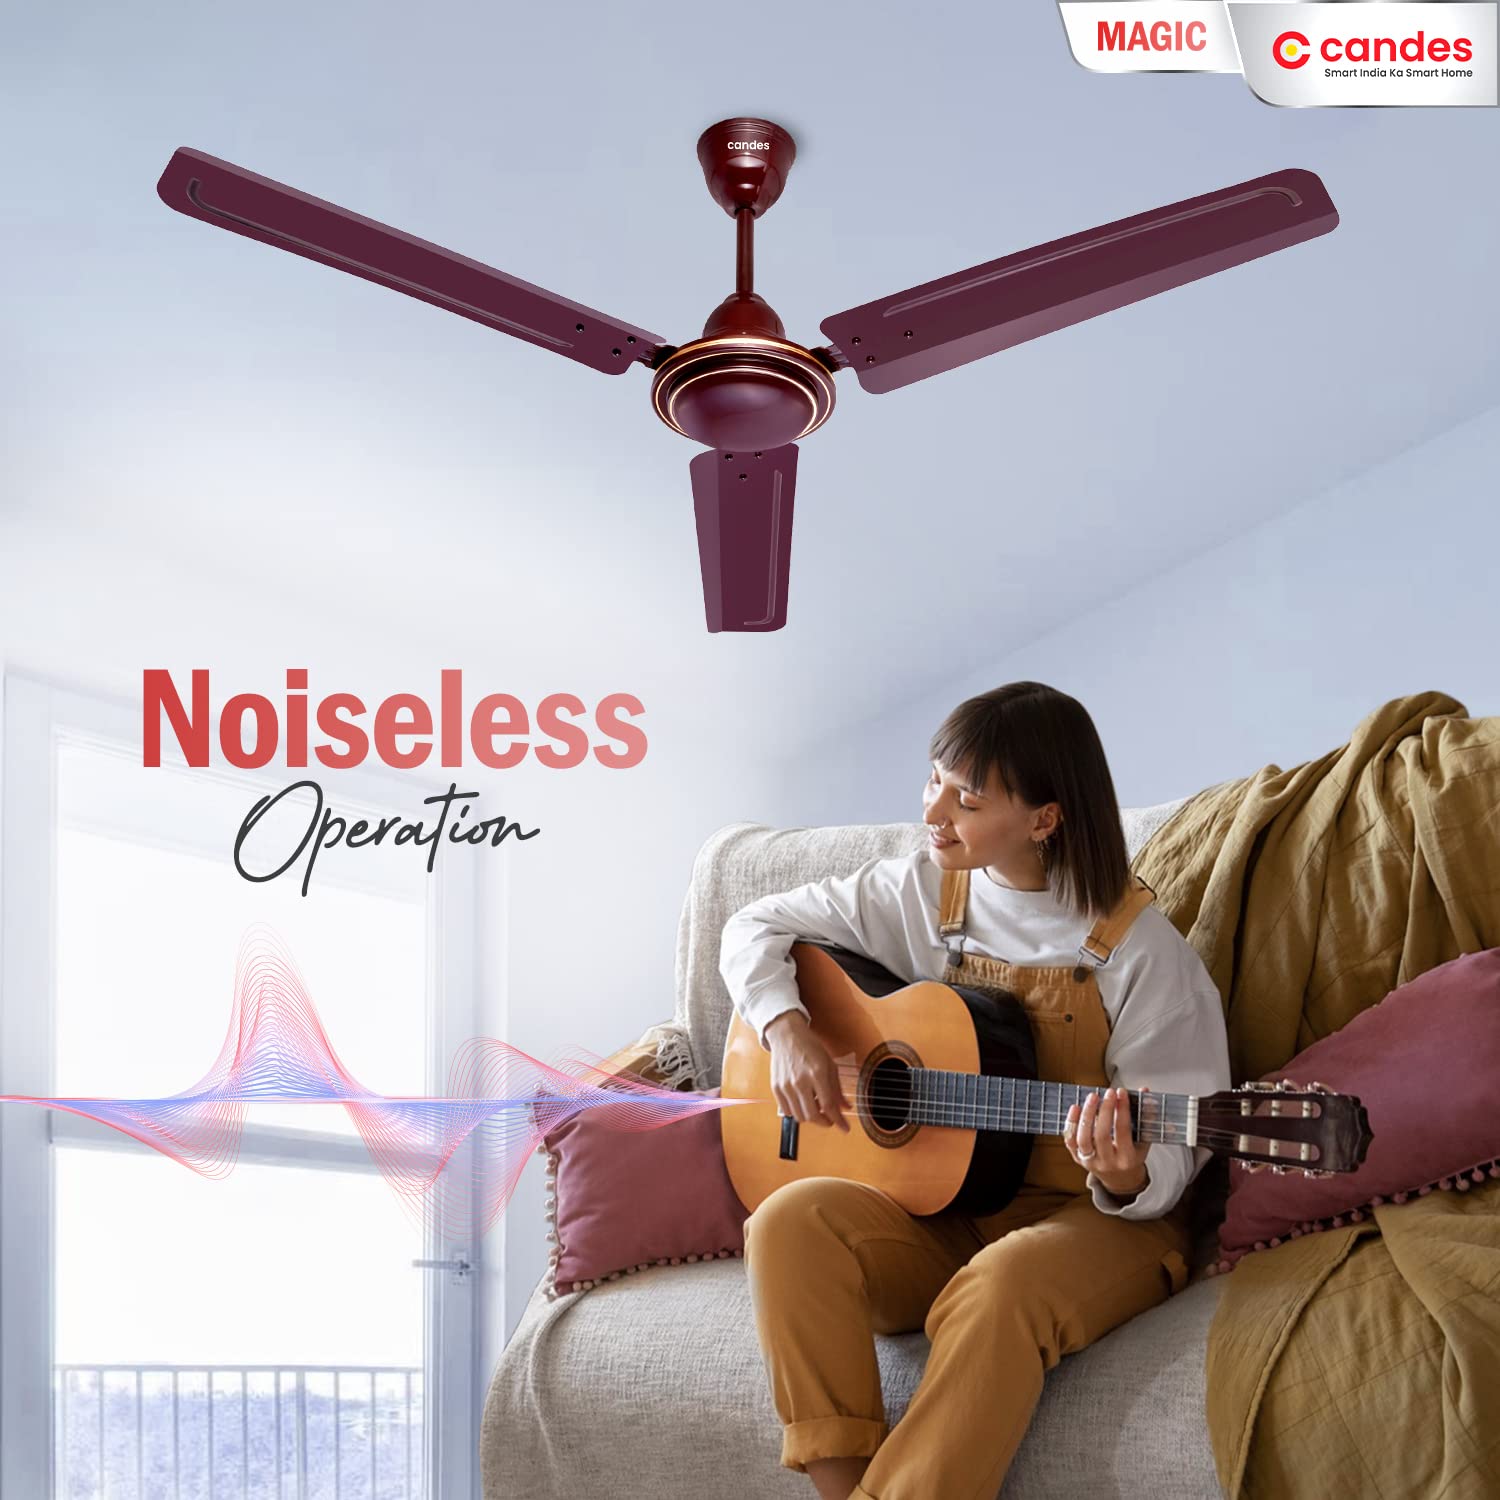 Candes Magic 48 inch /1200 MM High Speed Anti Dust Ceiling Fan, 405 RPM with 2 Years Warranty (Brown, Pack of 2)